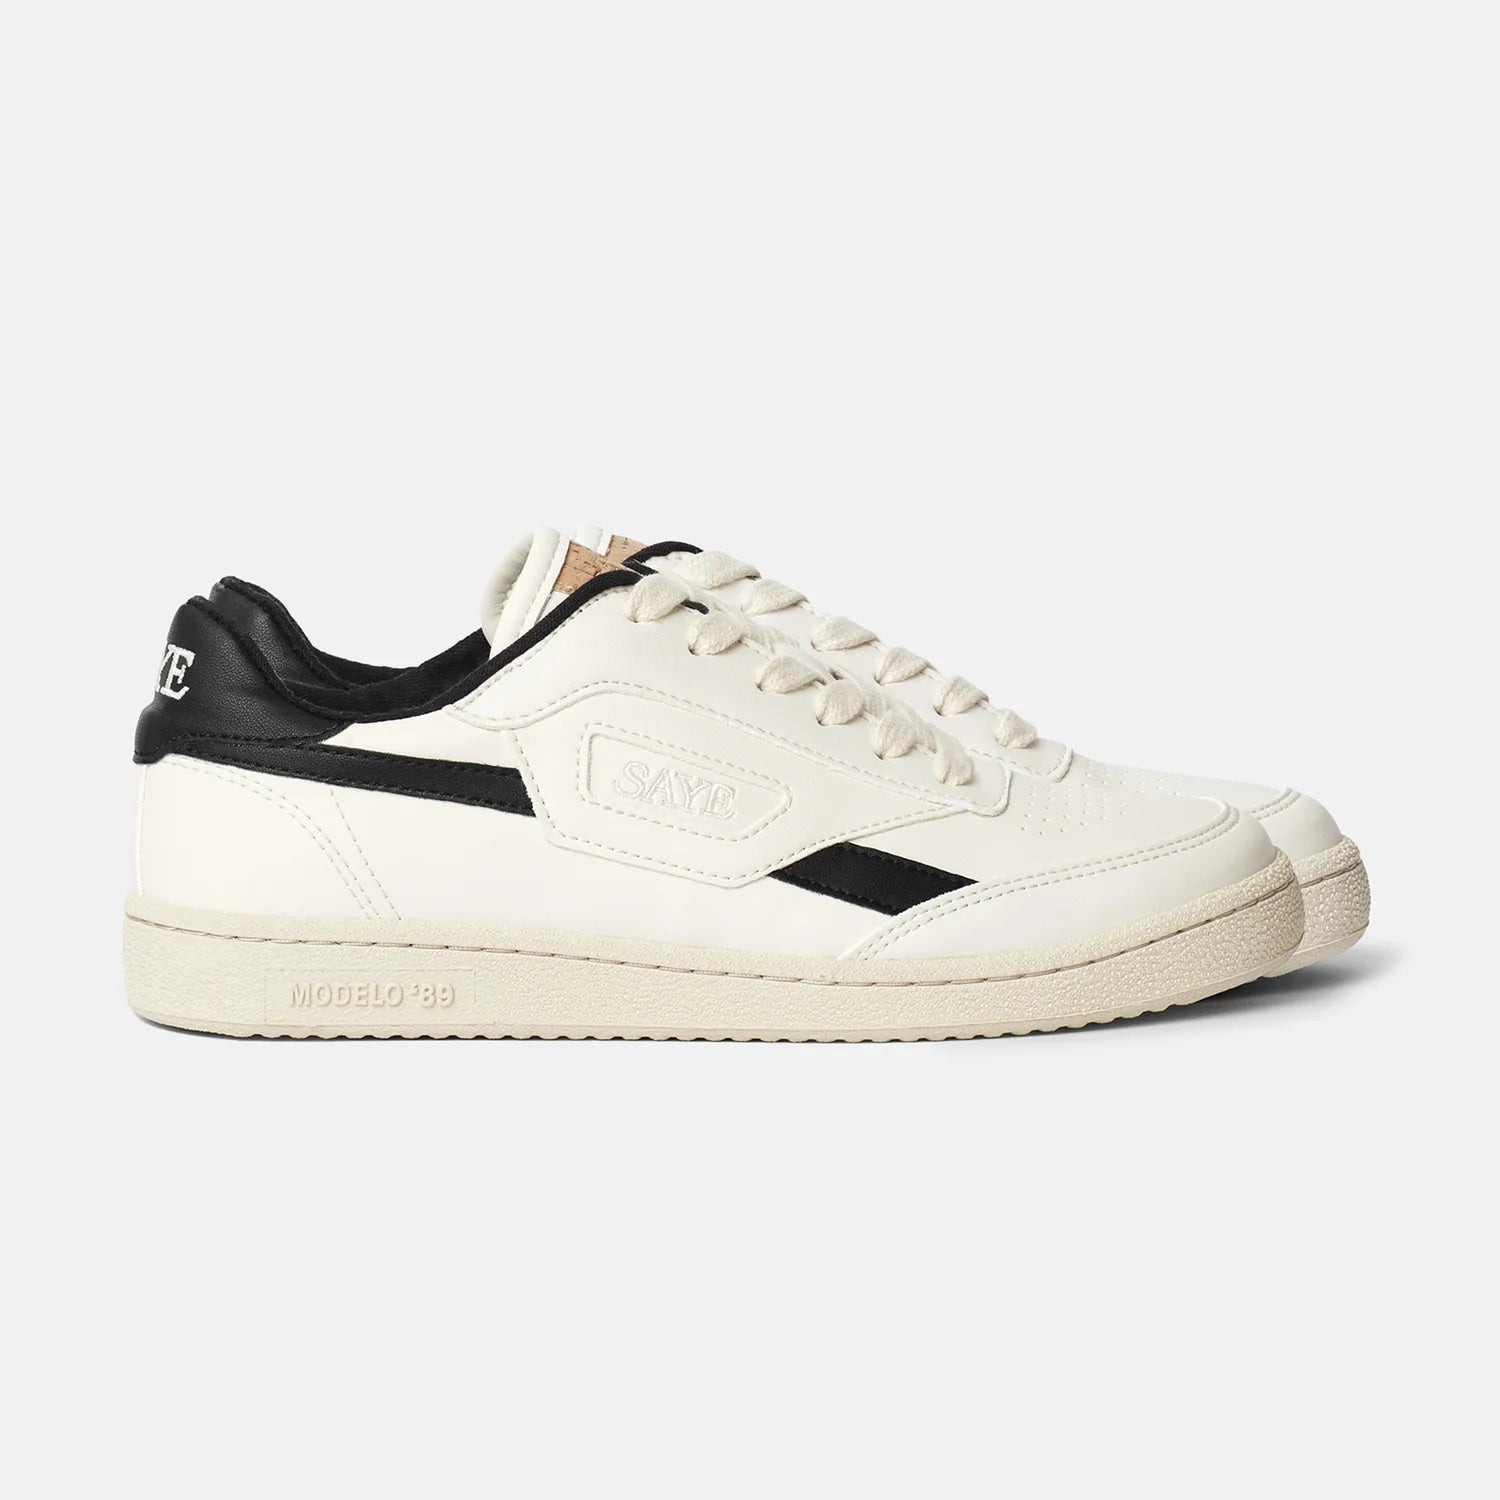 A pair of Modelo '89 sneakers in white with black detailing by SAYE.